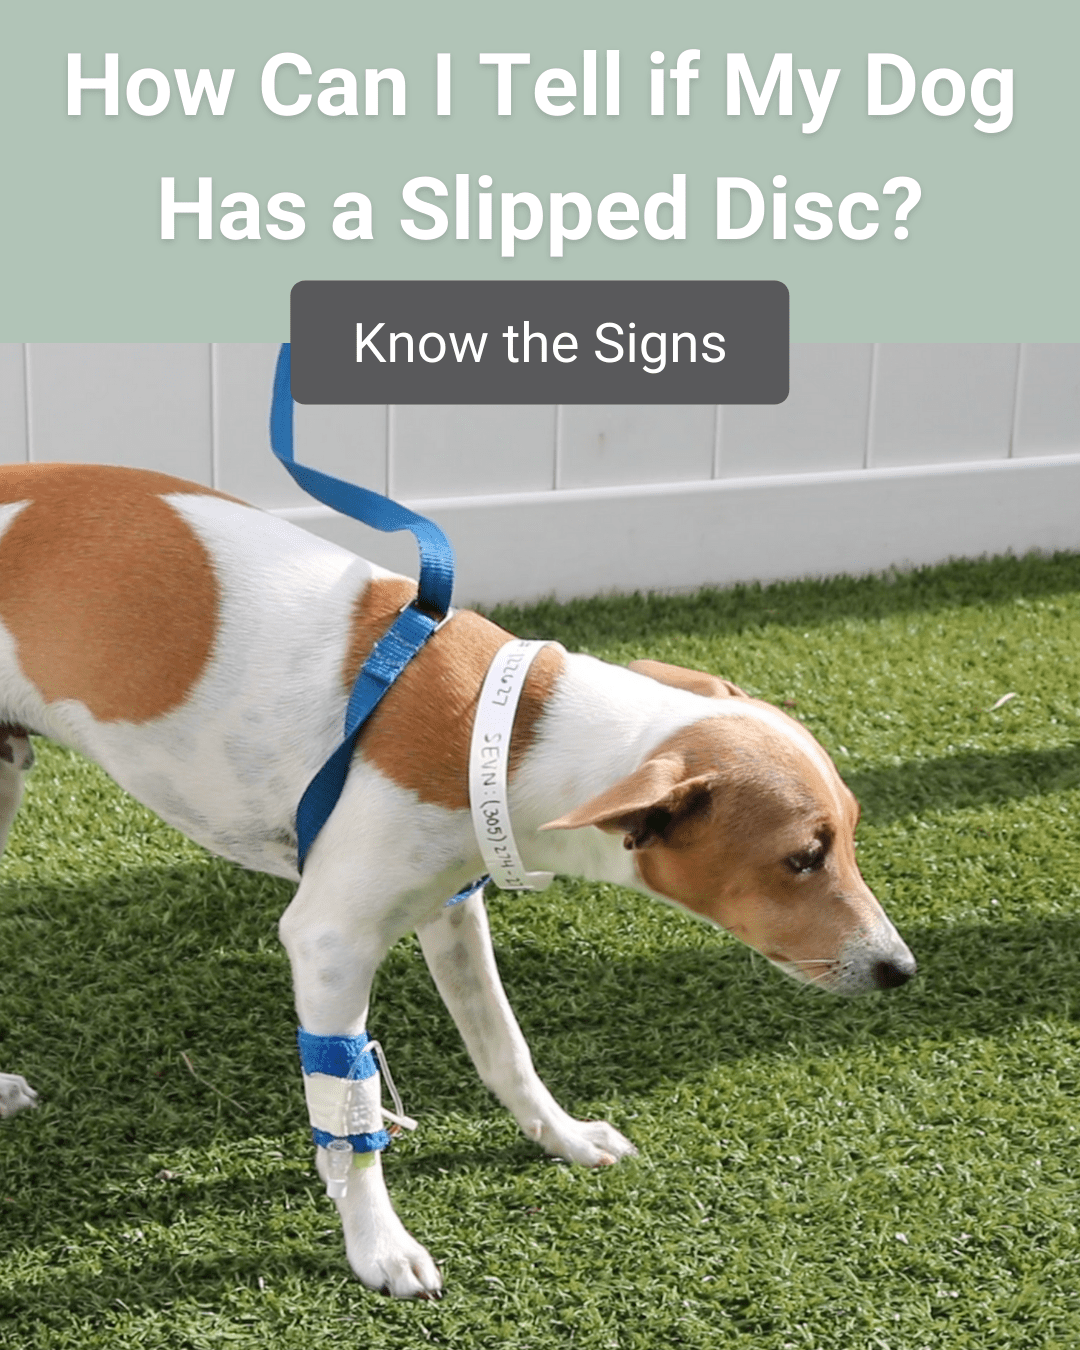 How Can I Tell if My Dog Has a Slipped Disc?